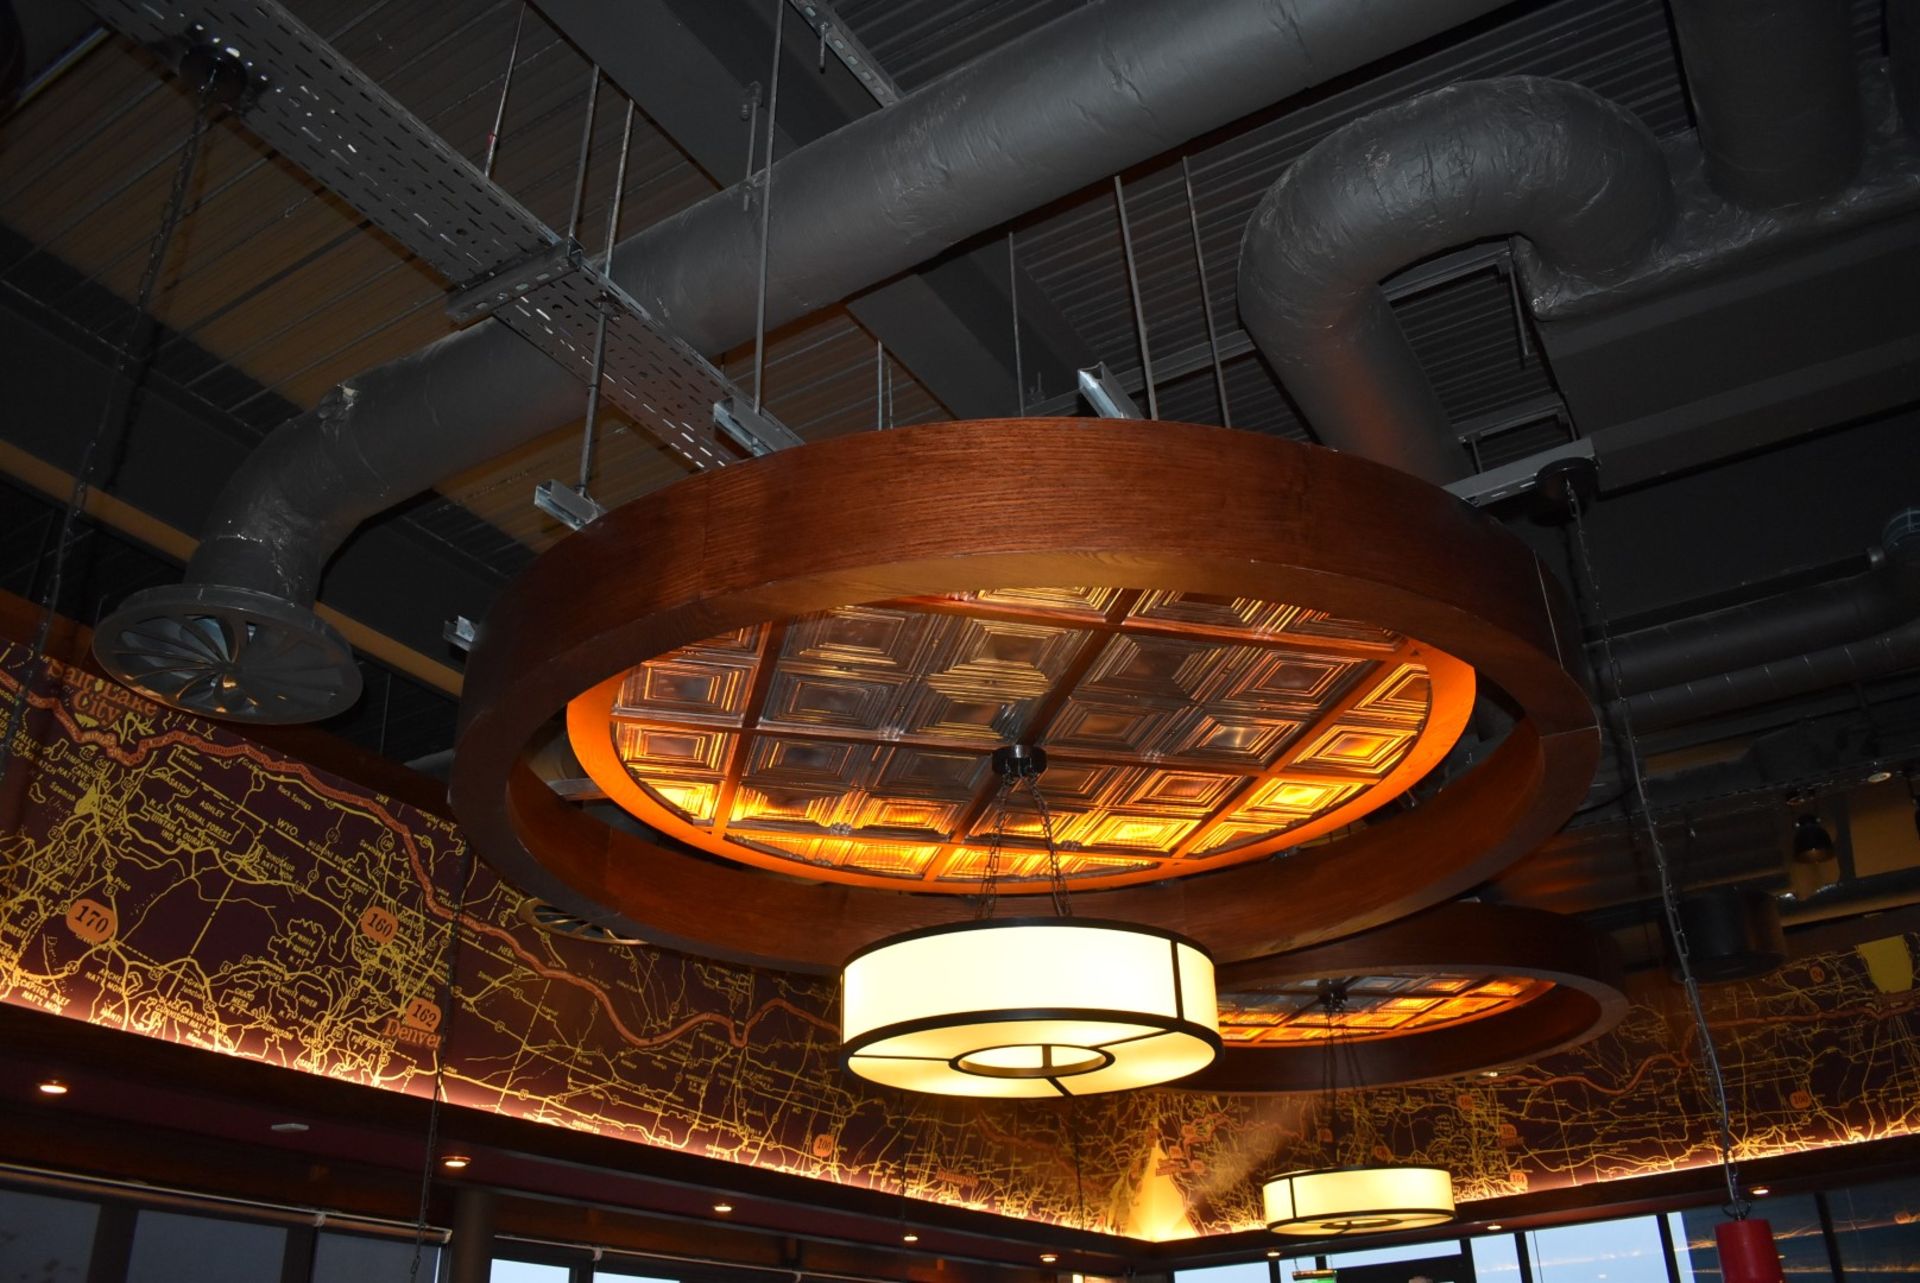 1 x Bespoke Suspended Round Ceiling Panel in Dark Wood With Panelling Inserts - Approx 2.6 Meter - Image 4 of 6